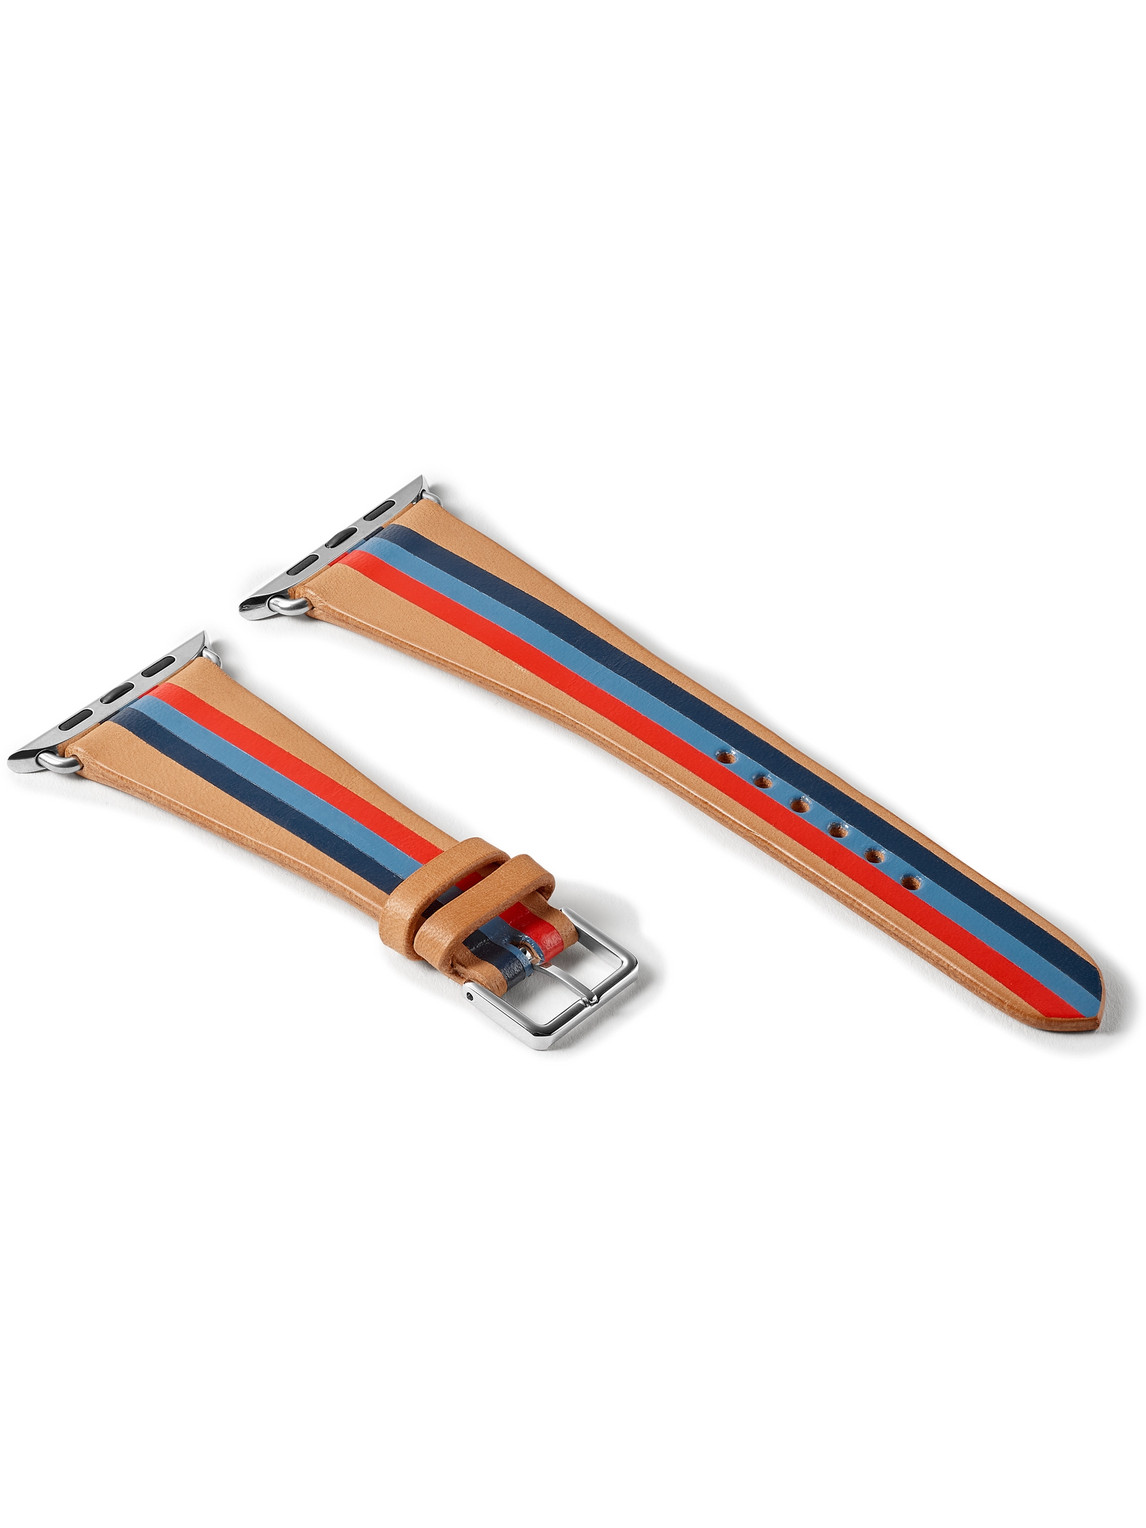 Blue Thunder Striped Leather Watch Strap